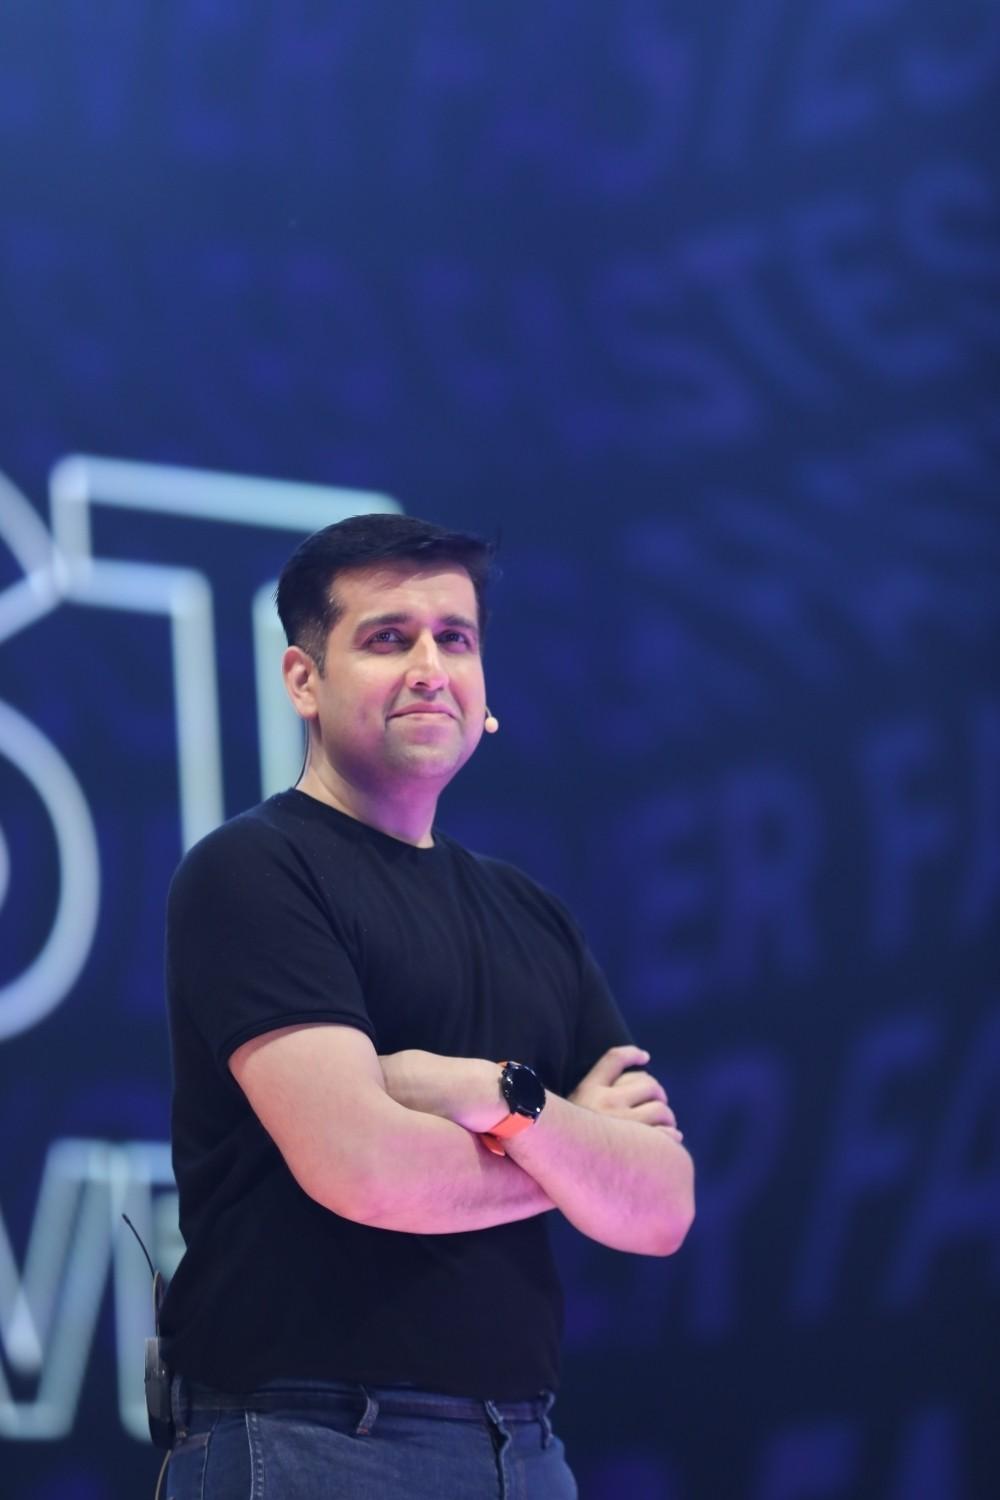 The Weekend Leader - 'Tech disruptor' Madhav Sheth gears up to make realme a global brand